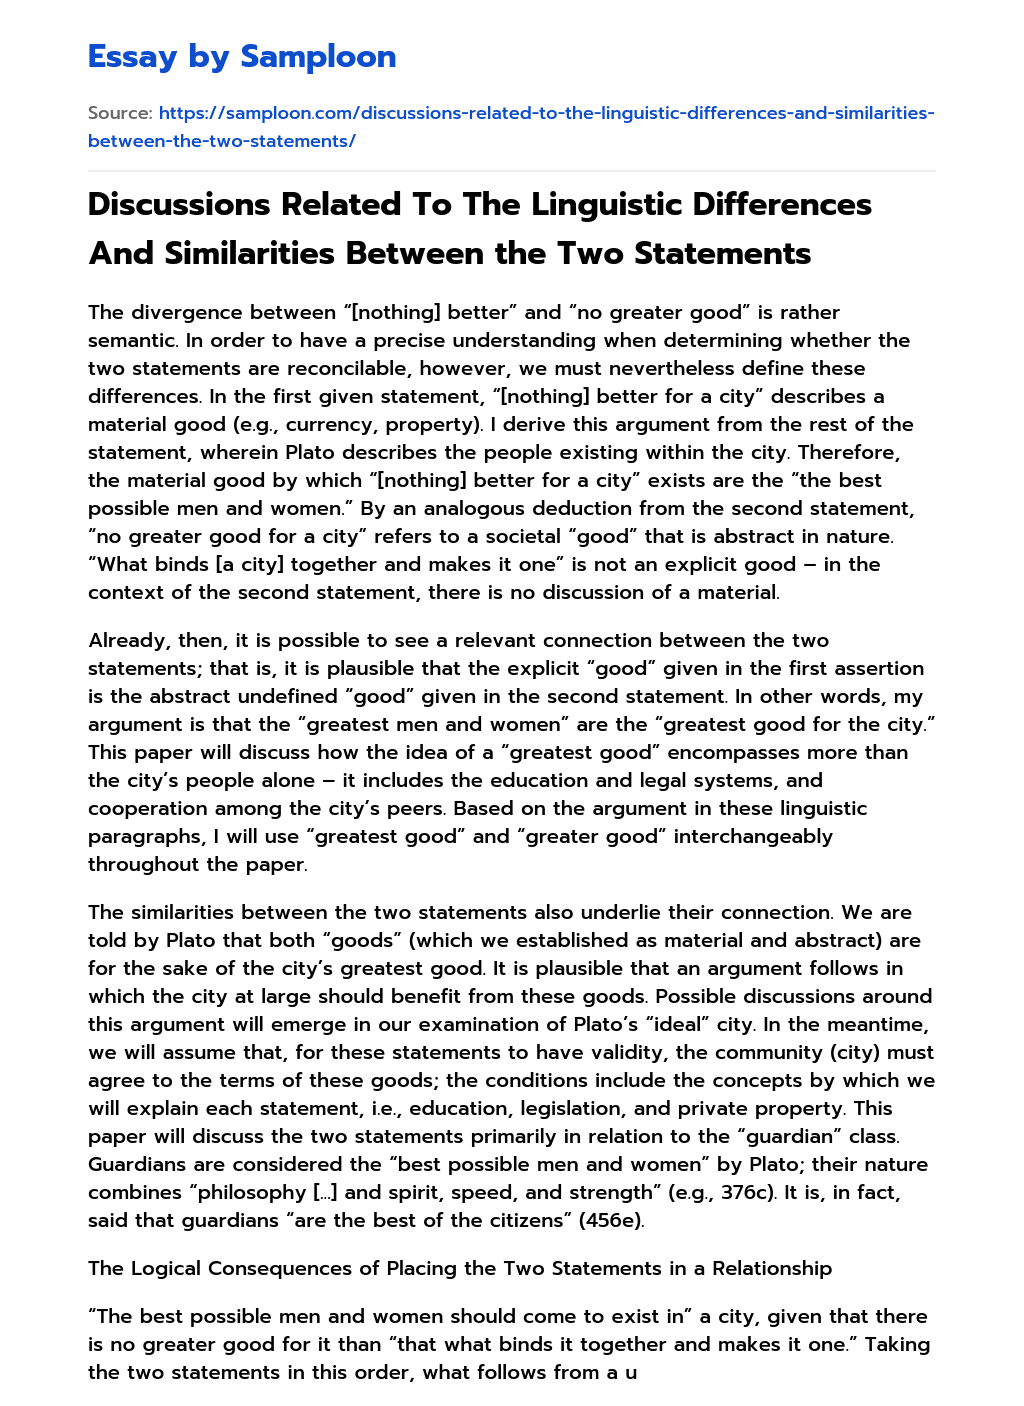 Discussions Related To The Linguistic Differences And Similarities Between the Two Statements essay